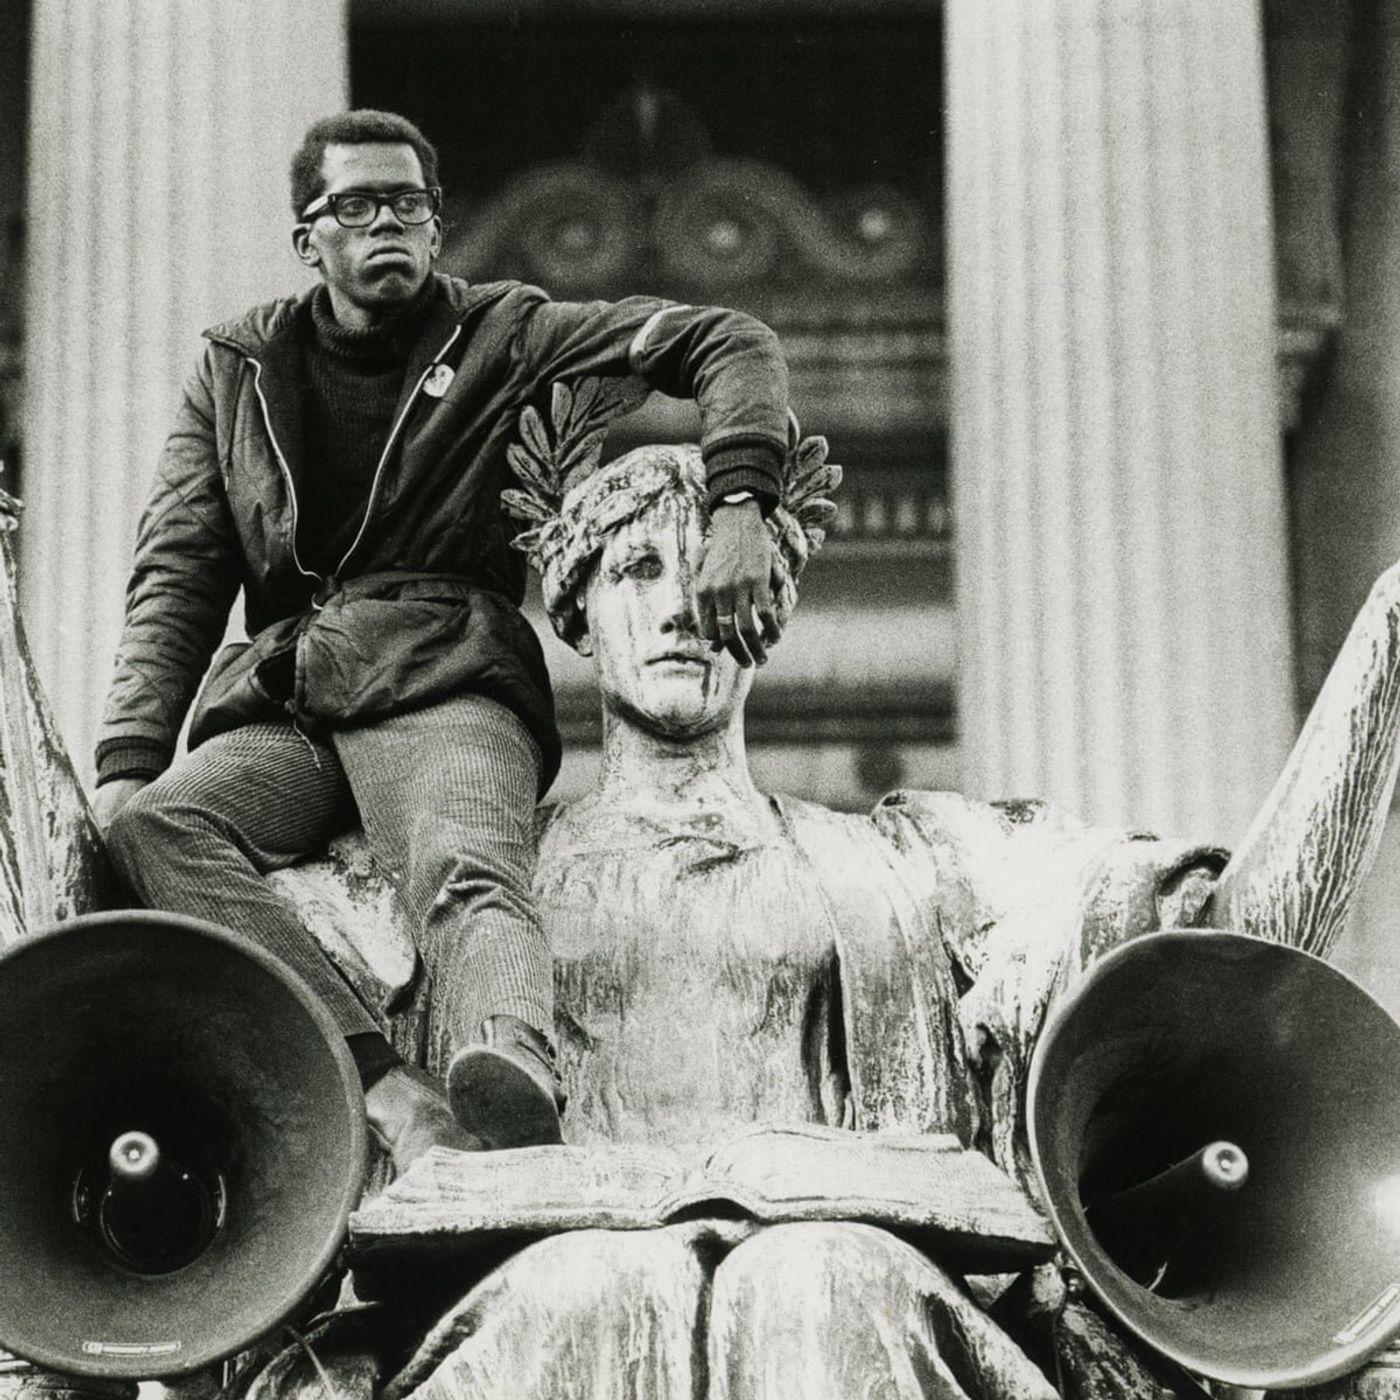 'A Time to Stir' looks at Columbia University in 1968